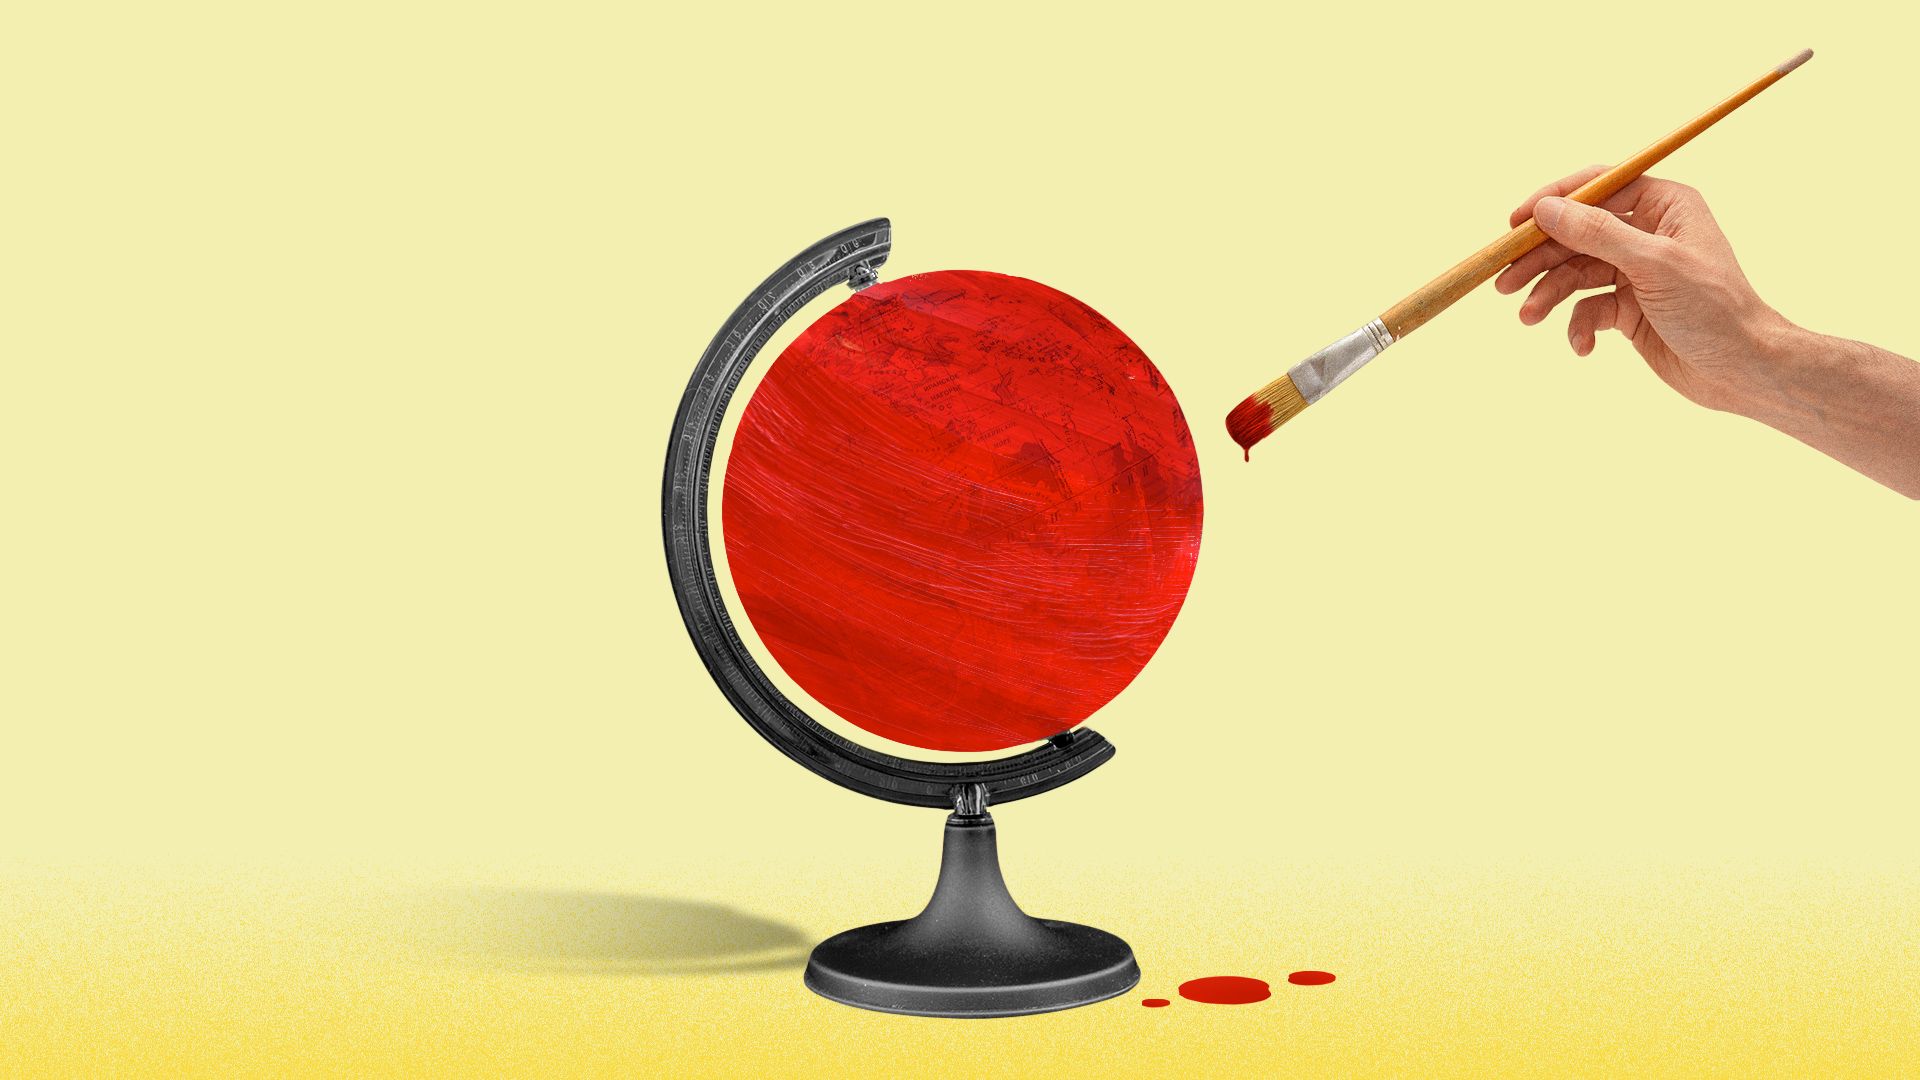 Illustration of a hand painting a globe red.